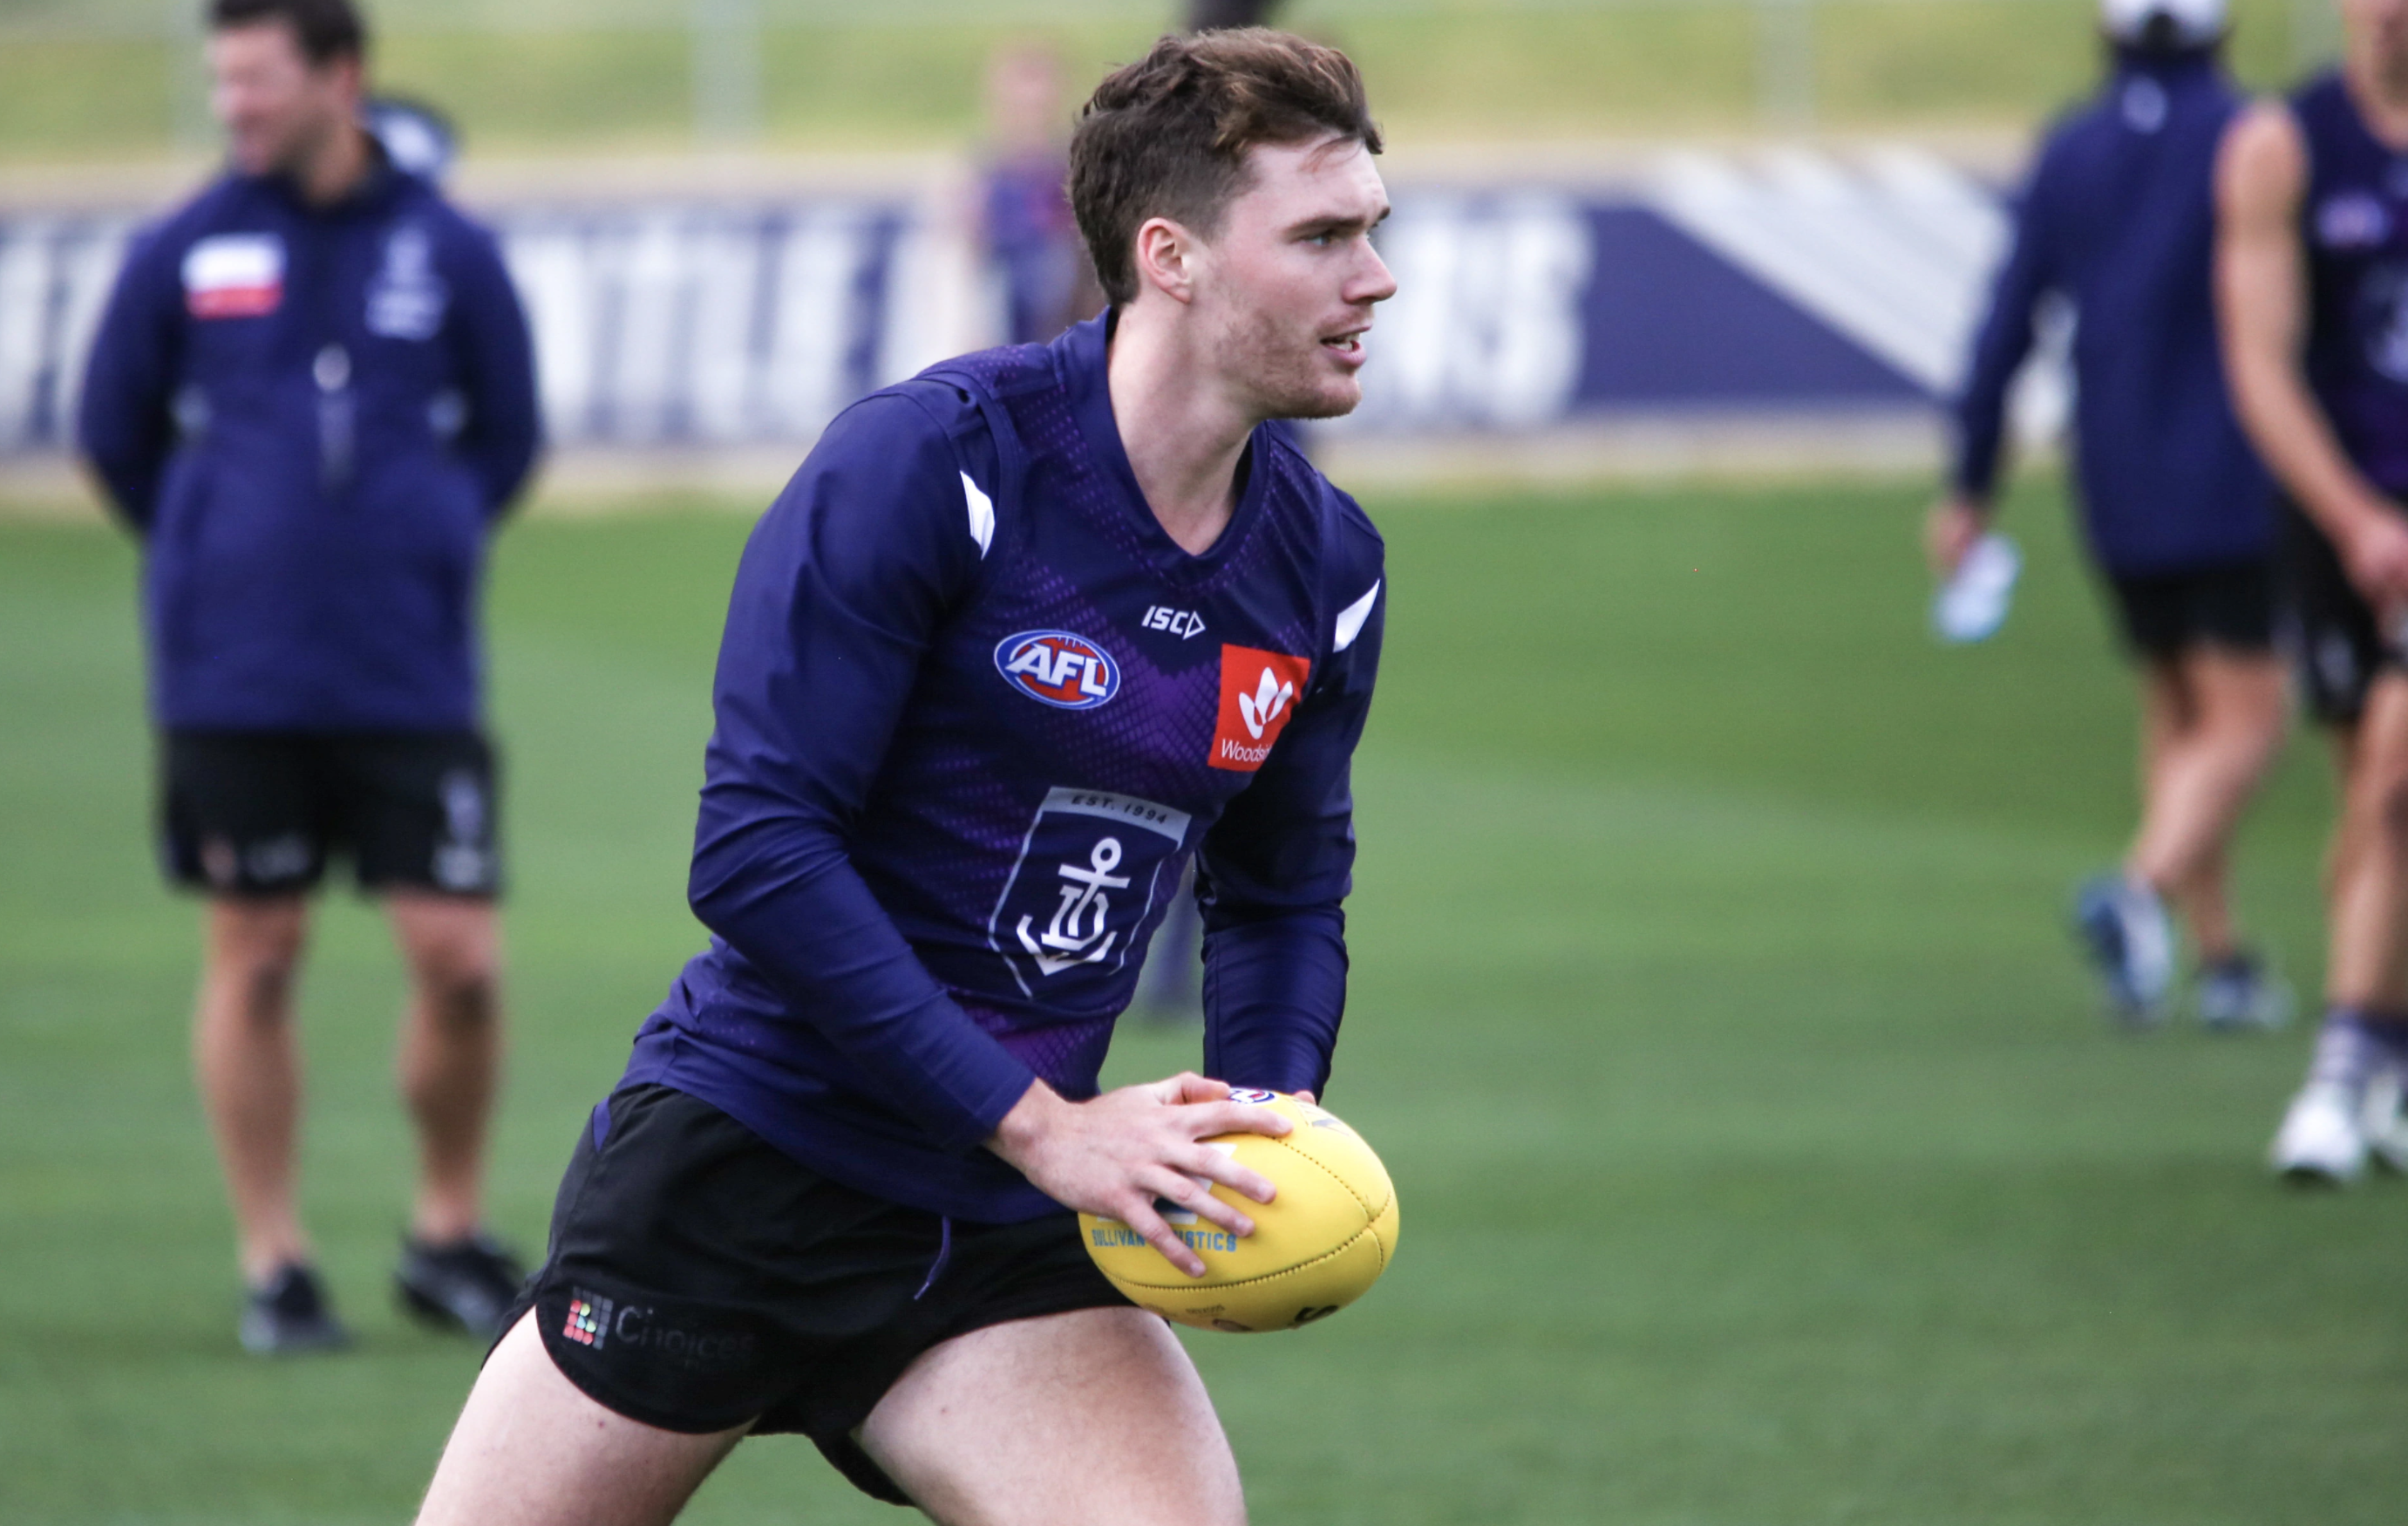 Fyfe will be the difference for Freo